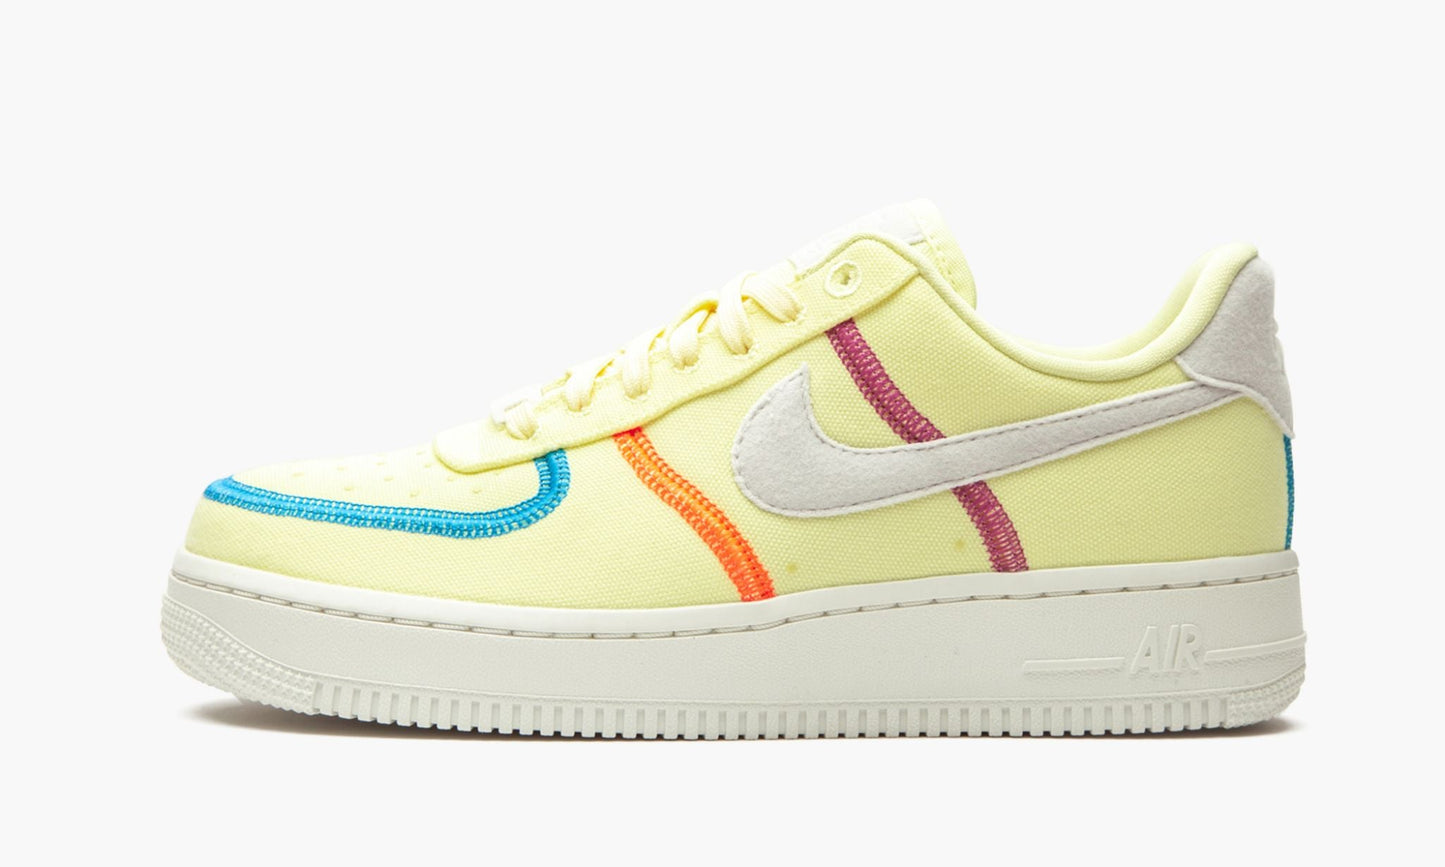 WMNS Air Force 1 '07 LX "Life Lime"